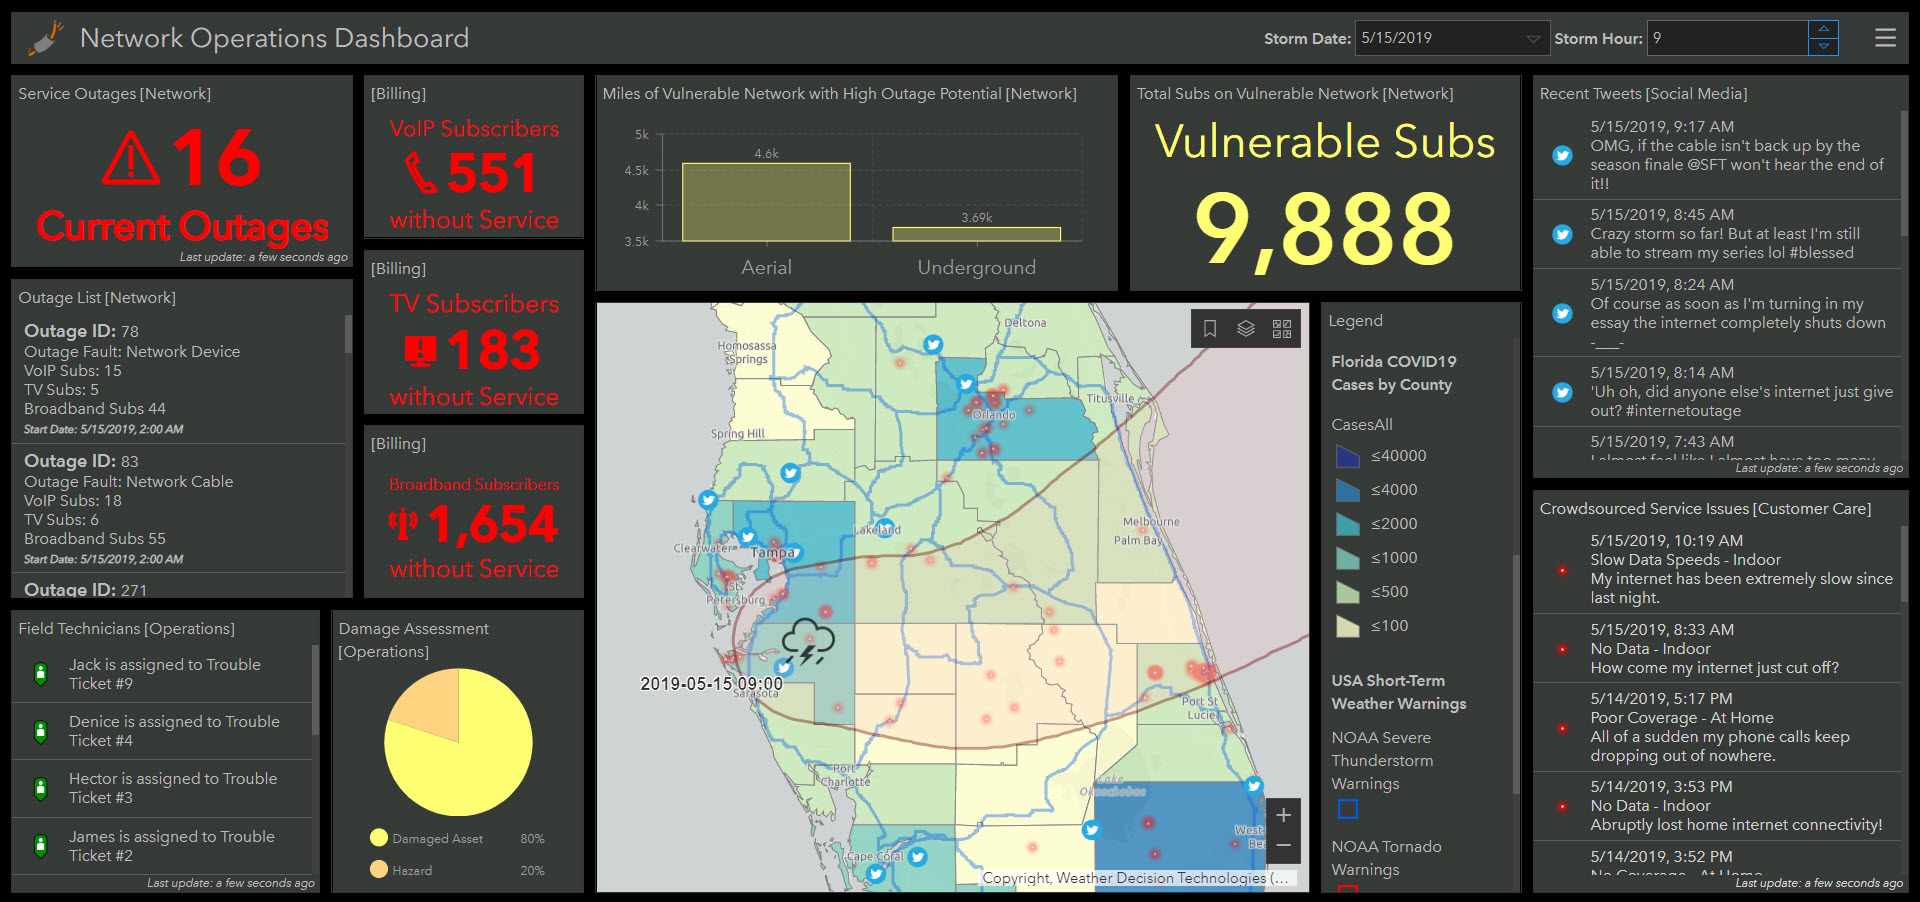 Dashboards assist with operational awareness before, during, and after emergency situations.